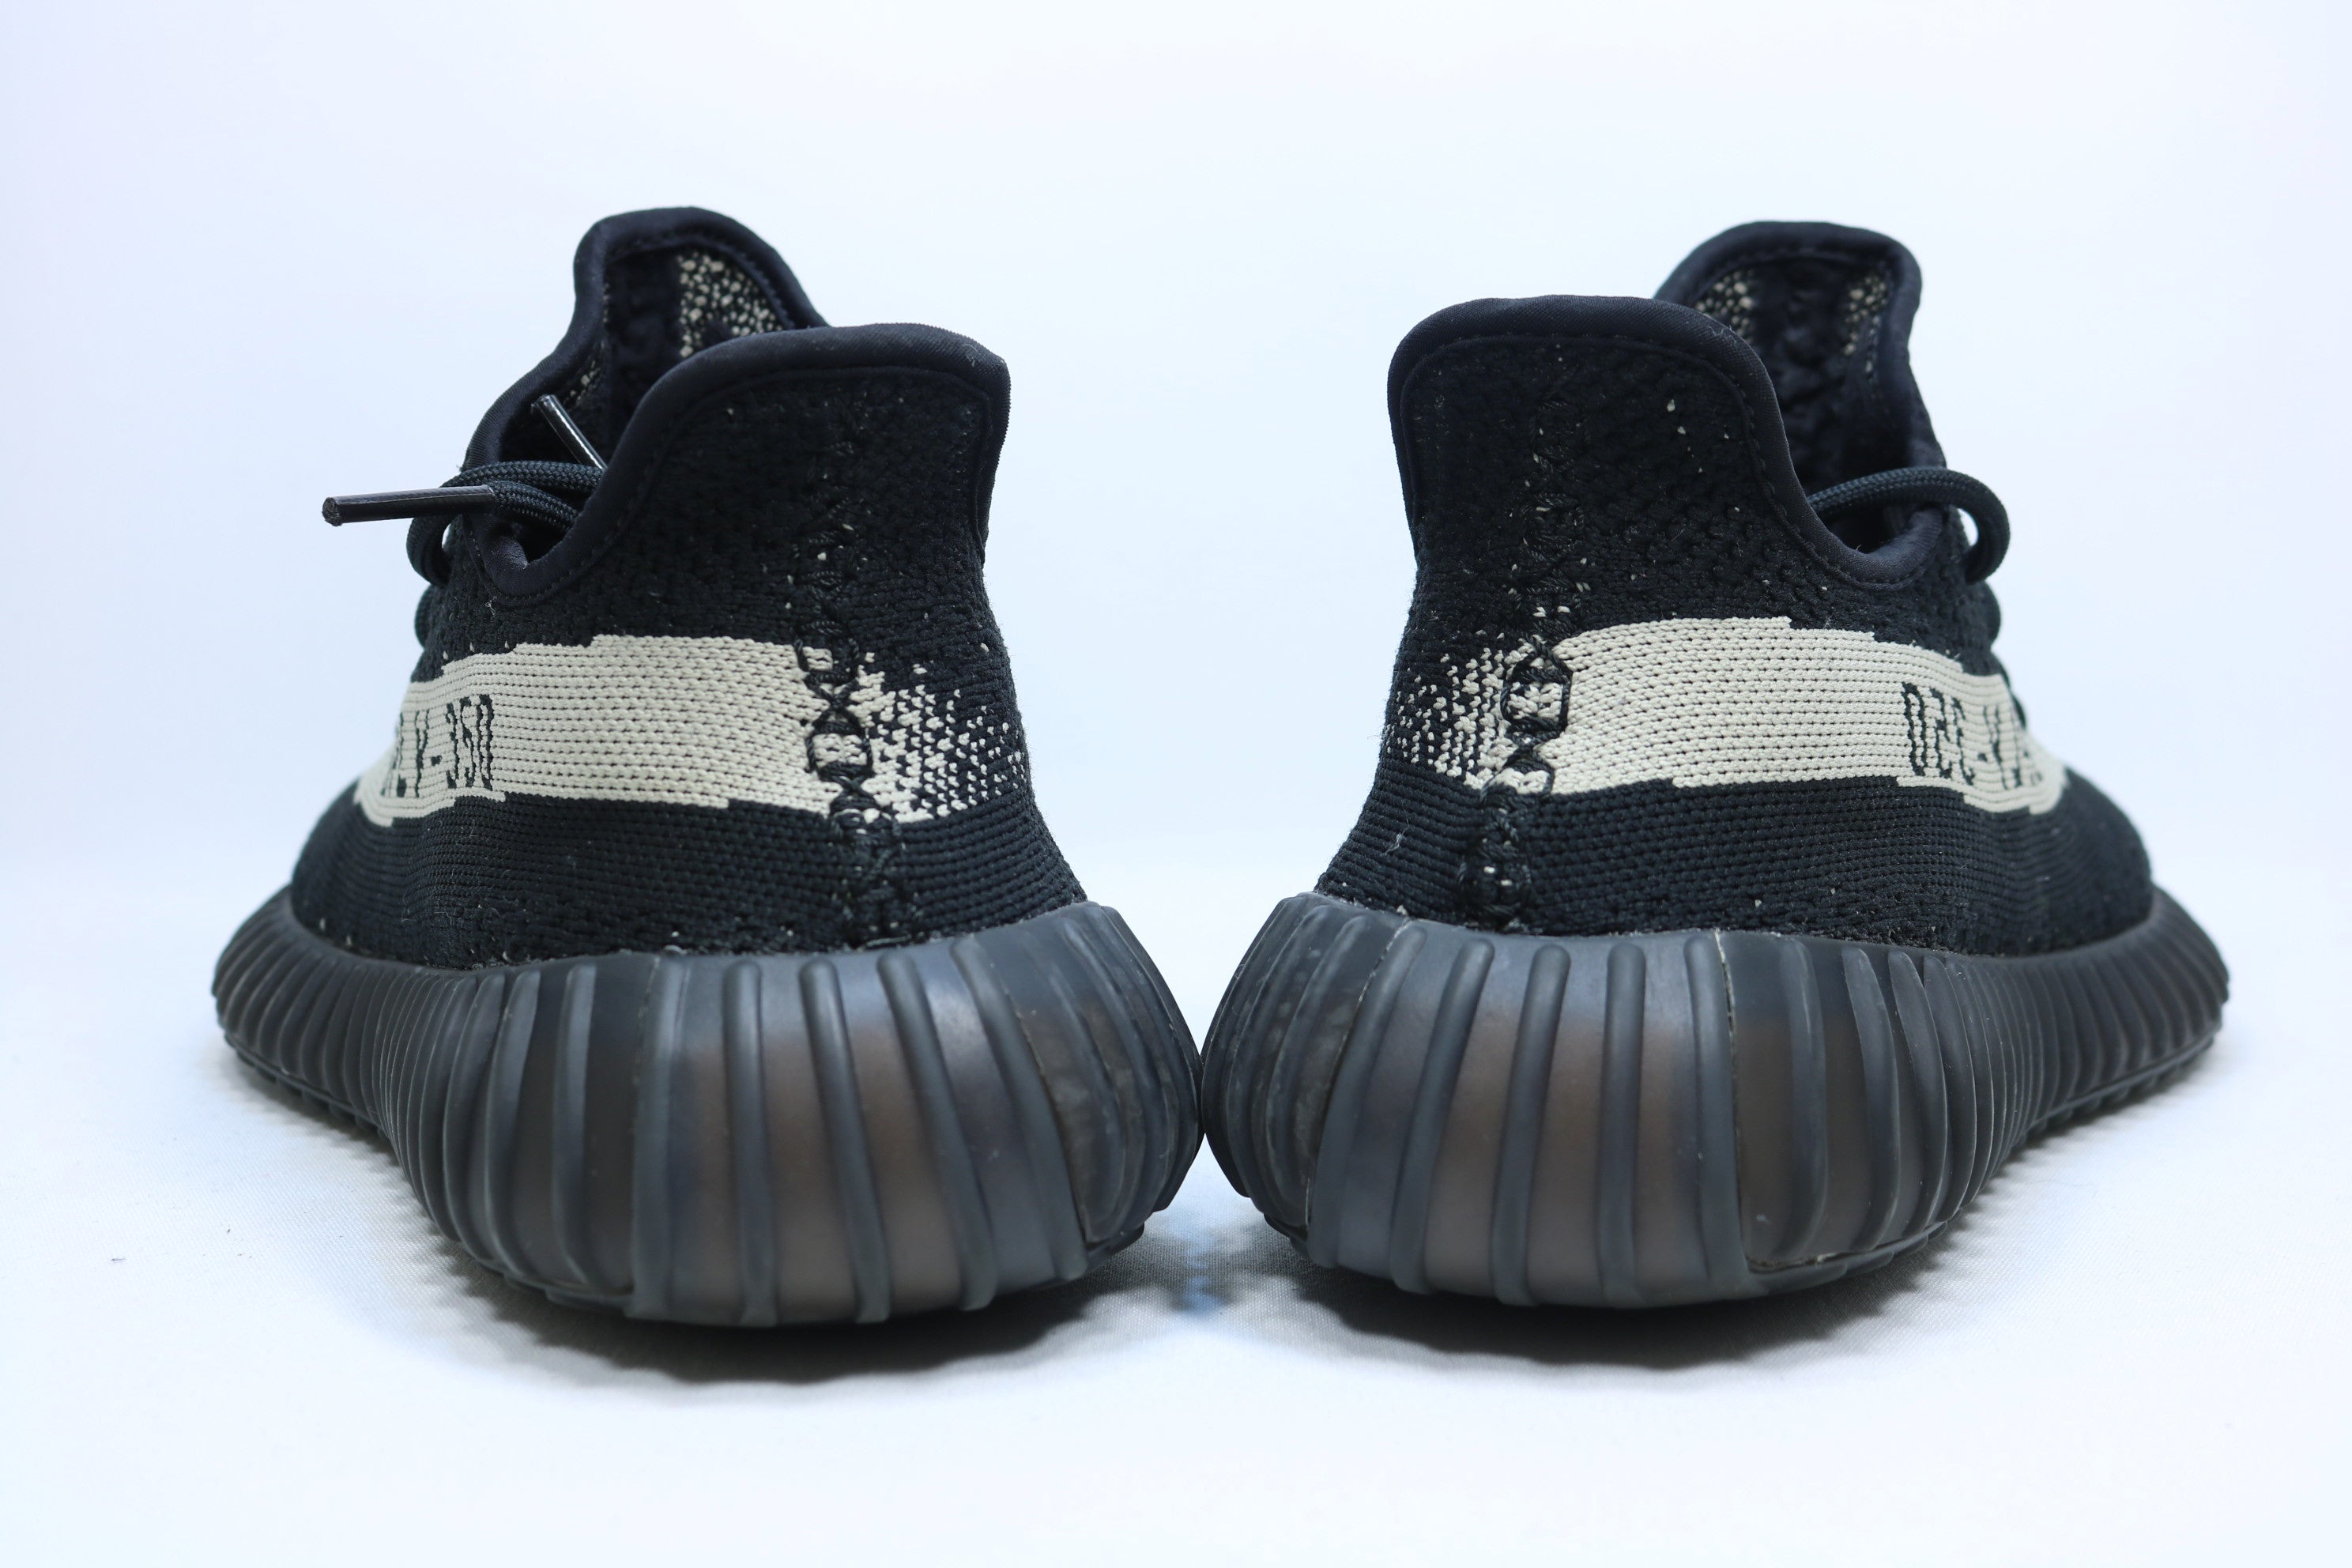 Adidas Yeezy Boost 350 V2 Oreo for Sale – The Sole Library